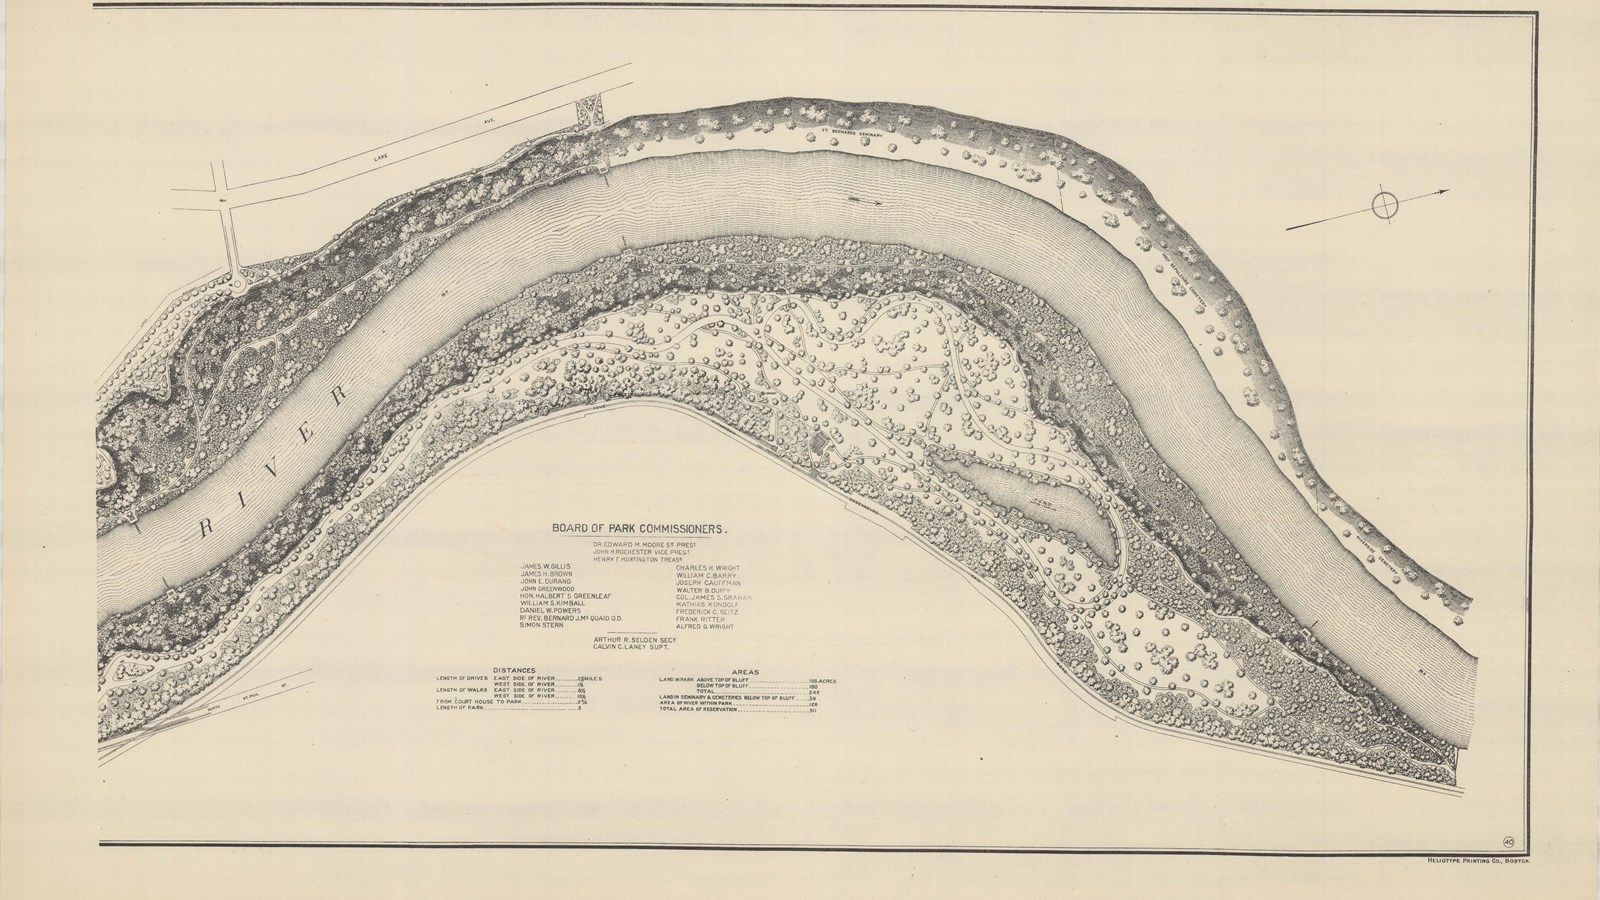 Plan of large curving river densely lined with trees on both sides 